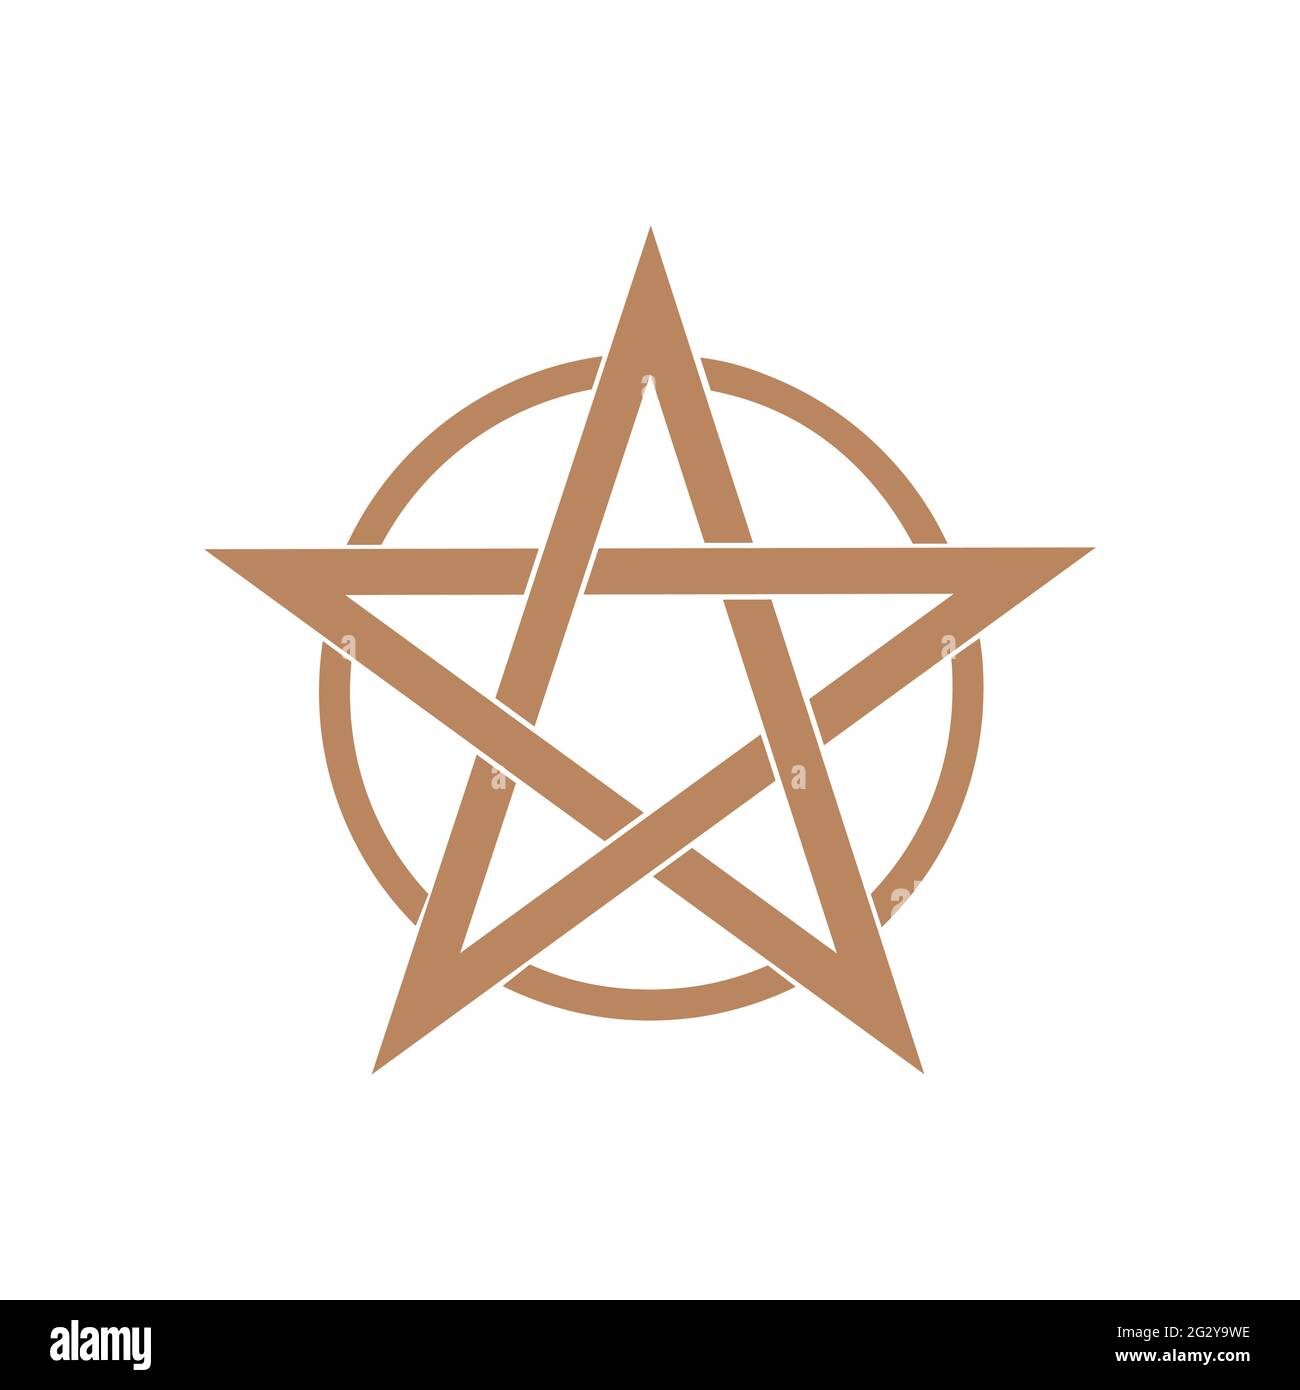 Esoteric symbol. Mystical and magical design with pentagram Stock Vector